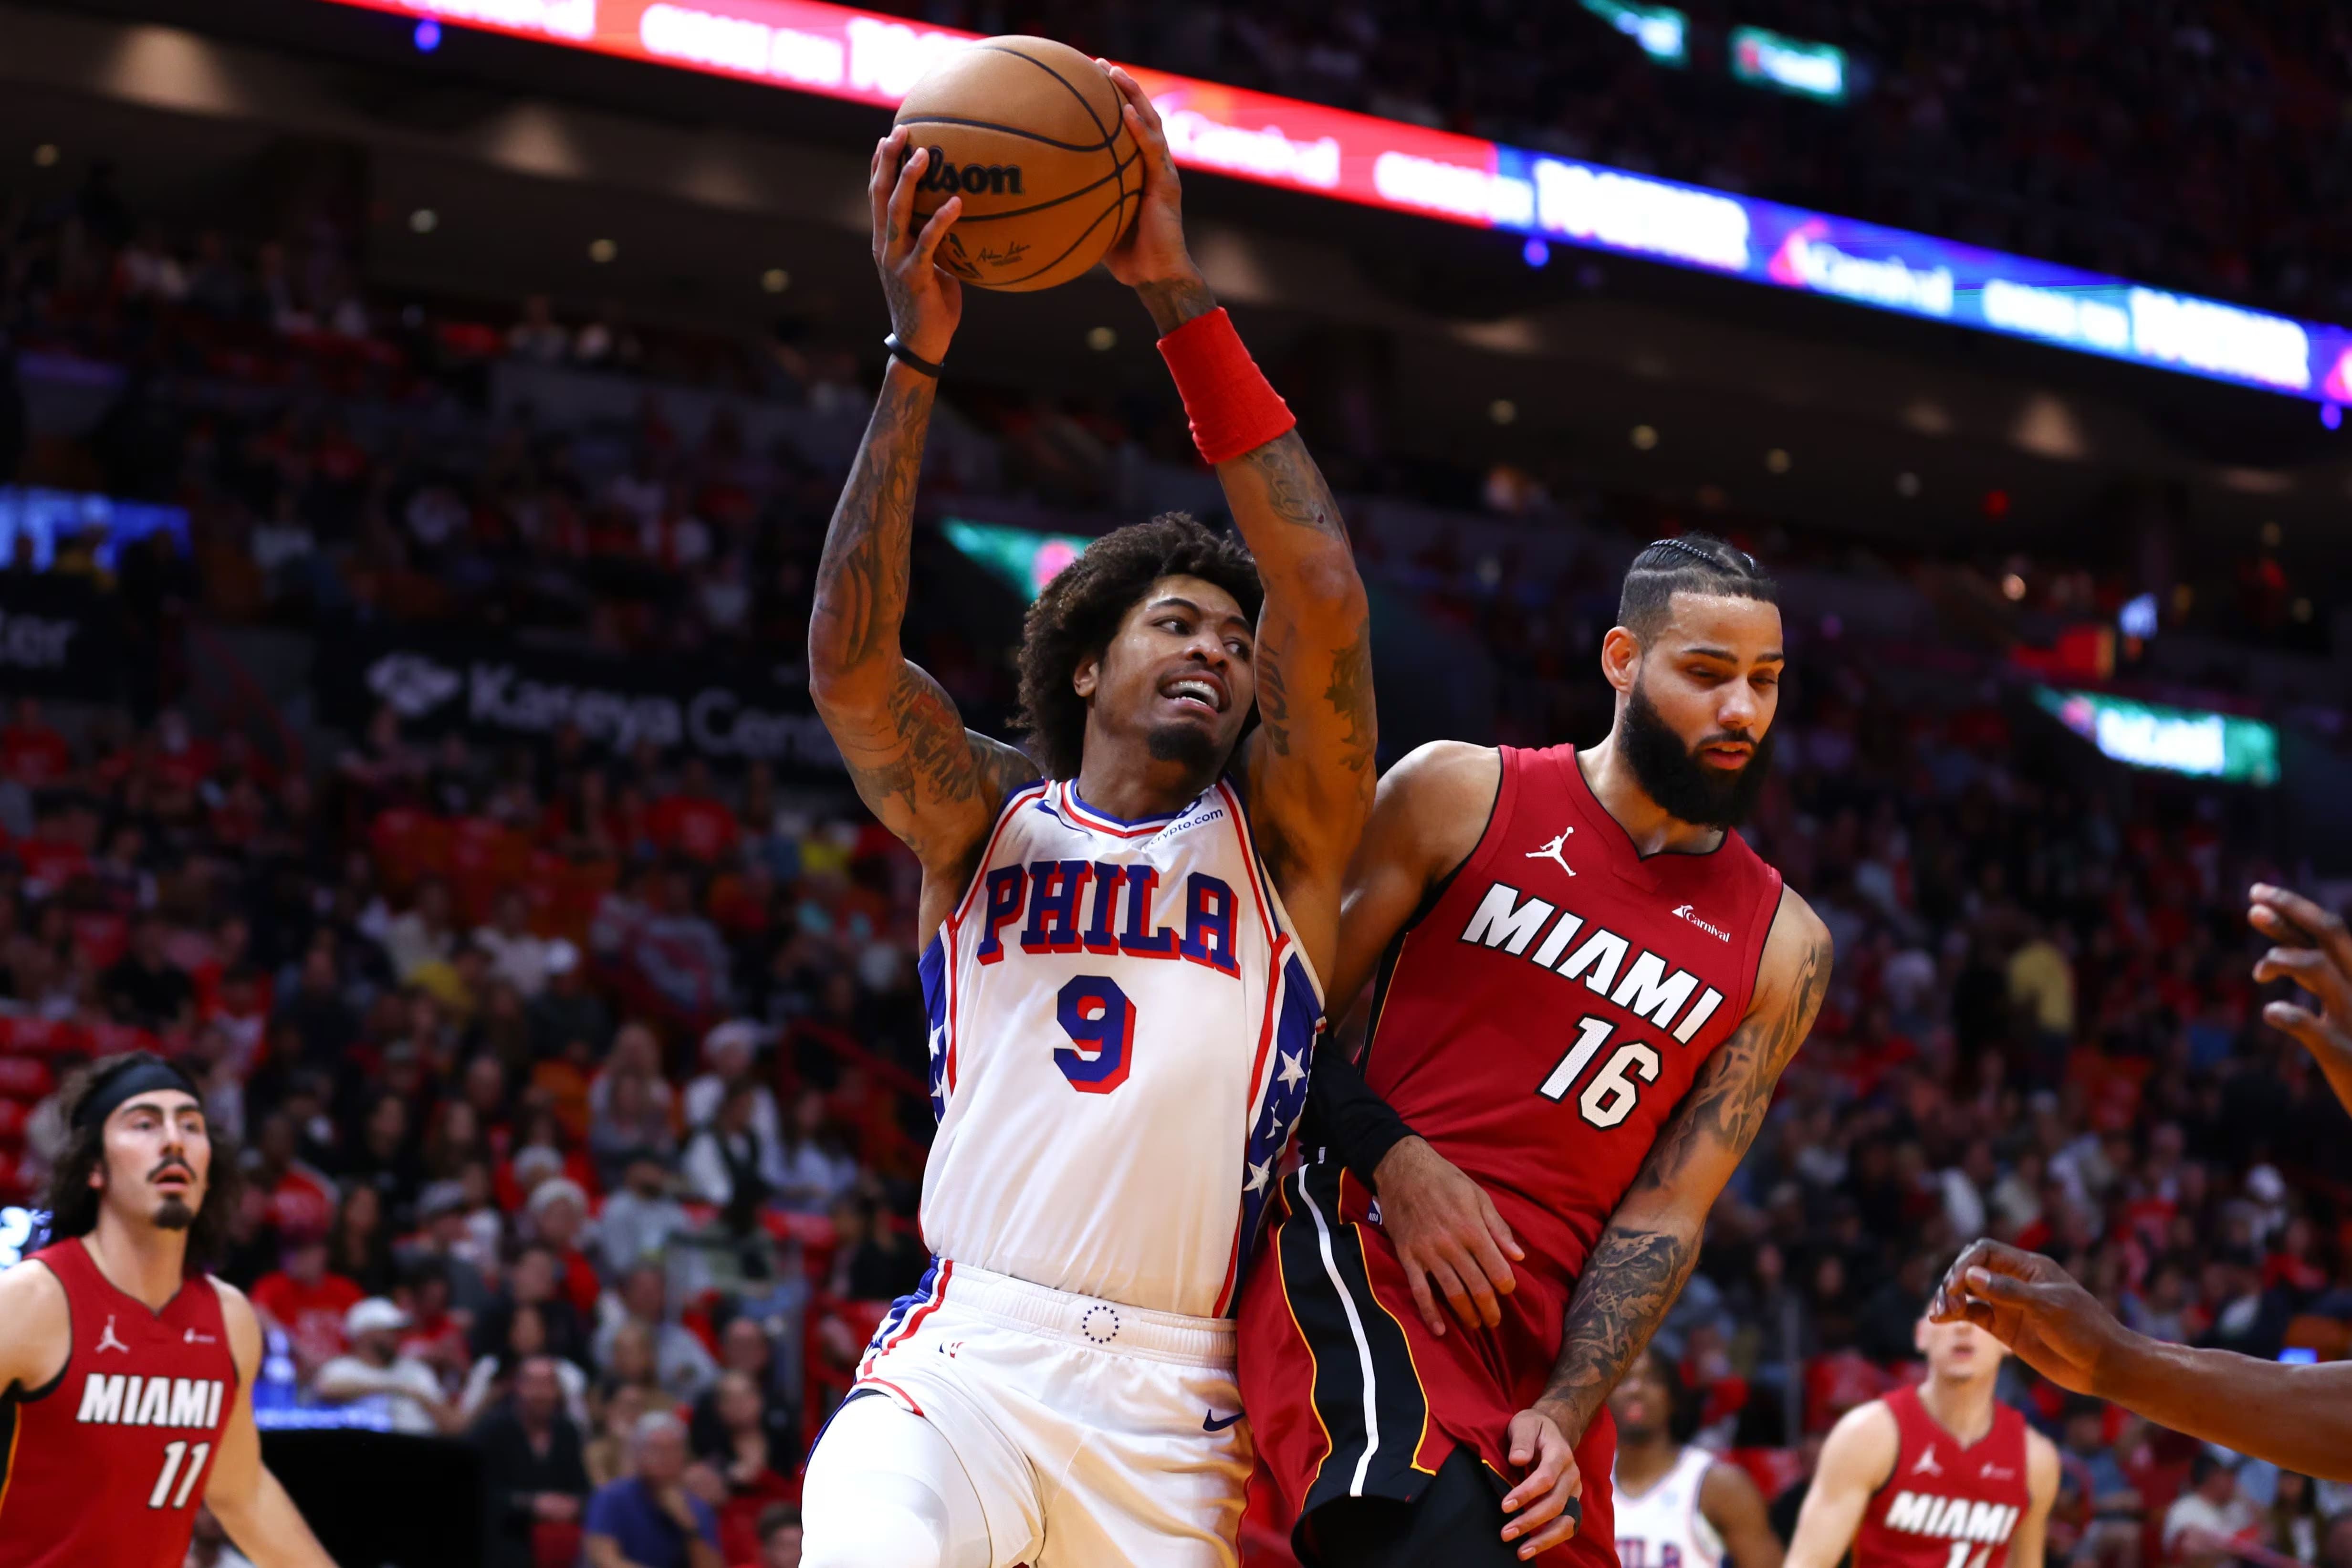 Philadelphia 76ers vs. Miami Heat: Preview, Where to Watch and Betting Odds